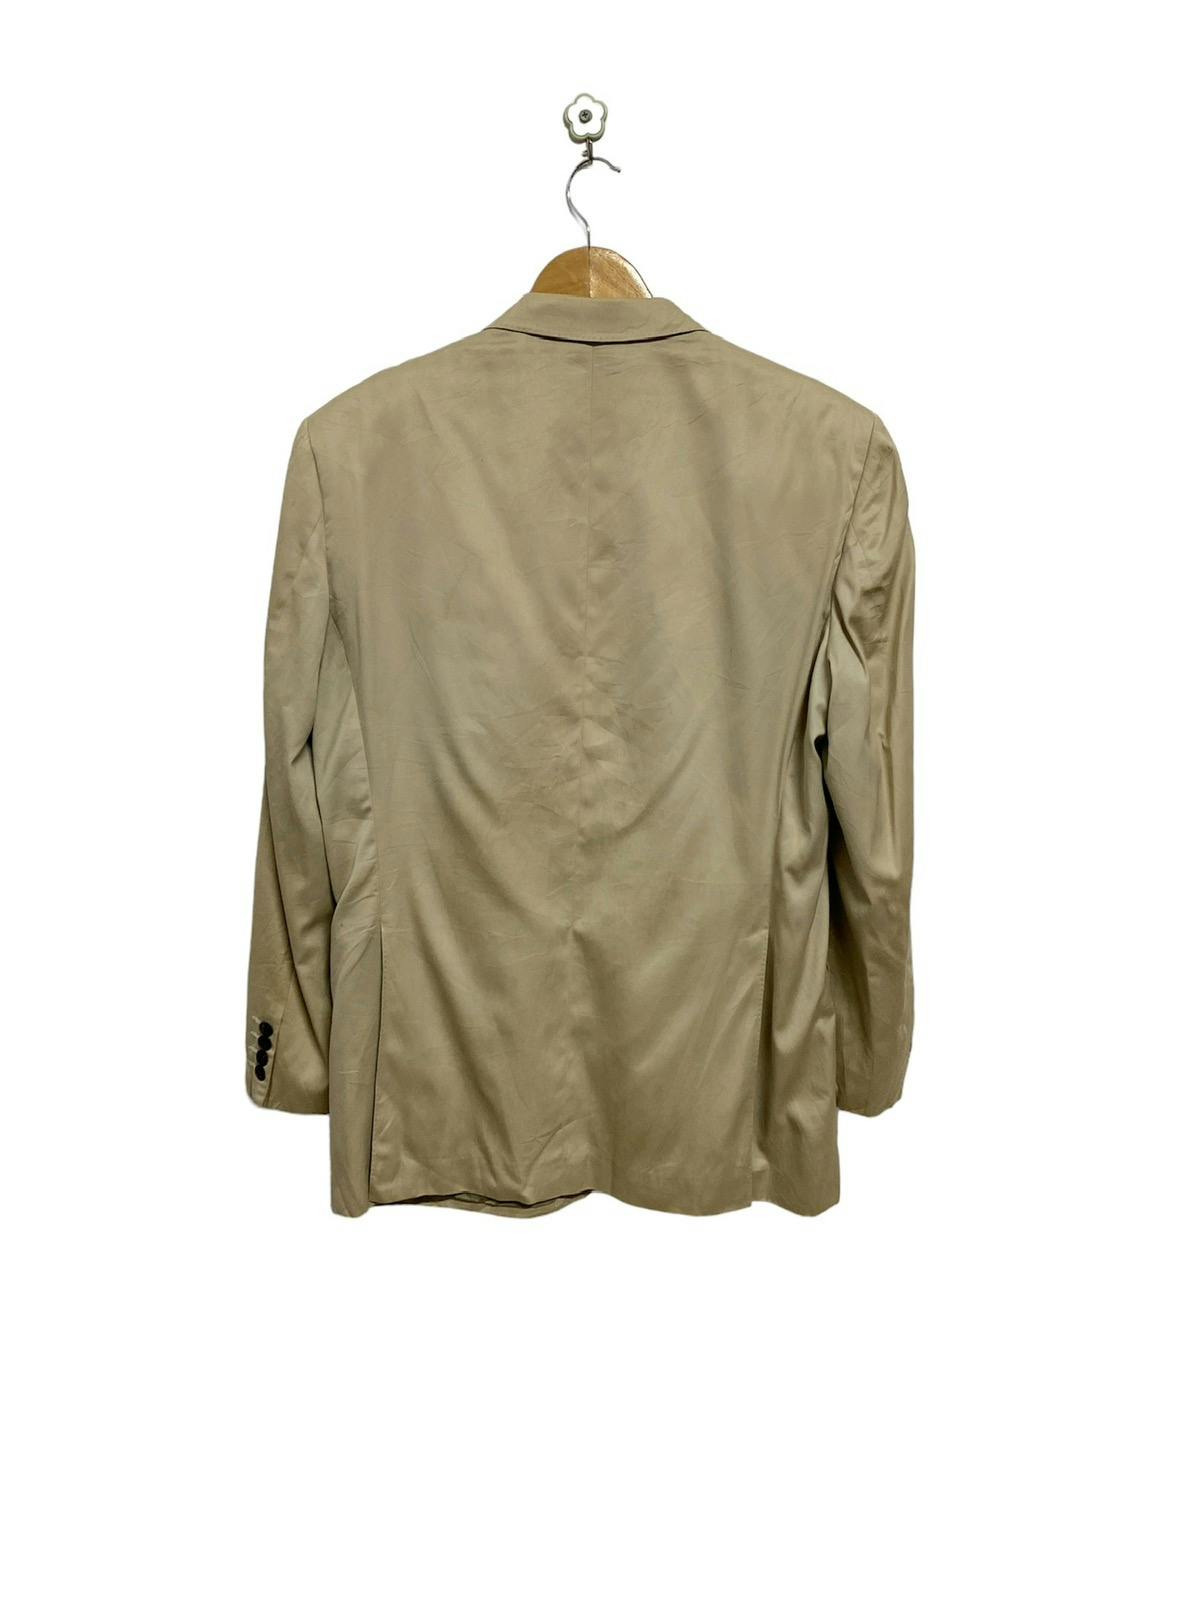 Givenchy Relaxed Jacket Blazer Suit - 2